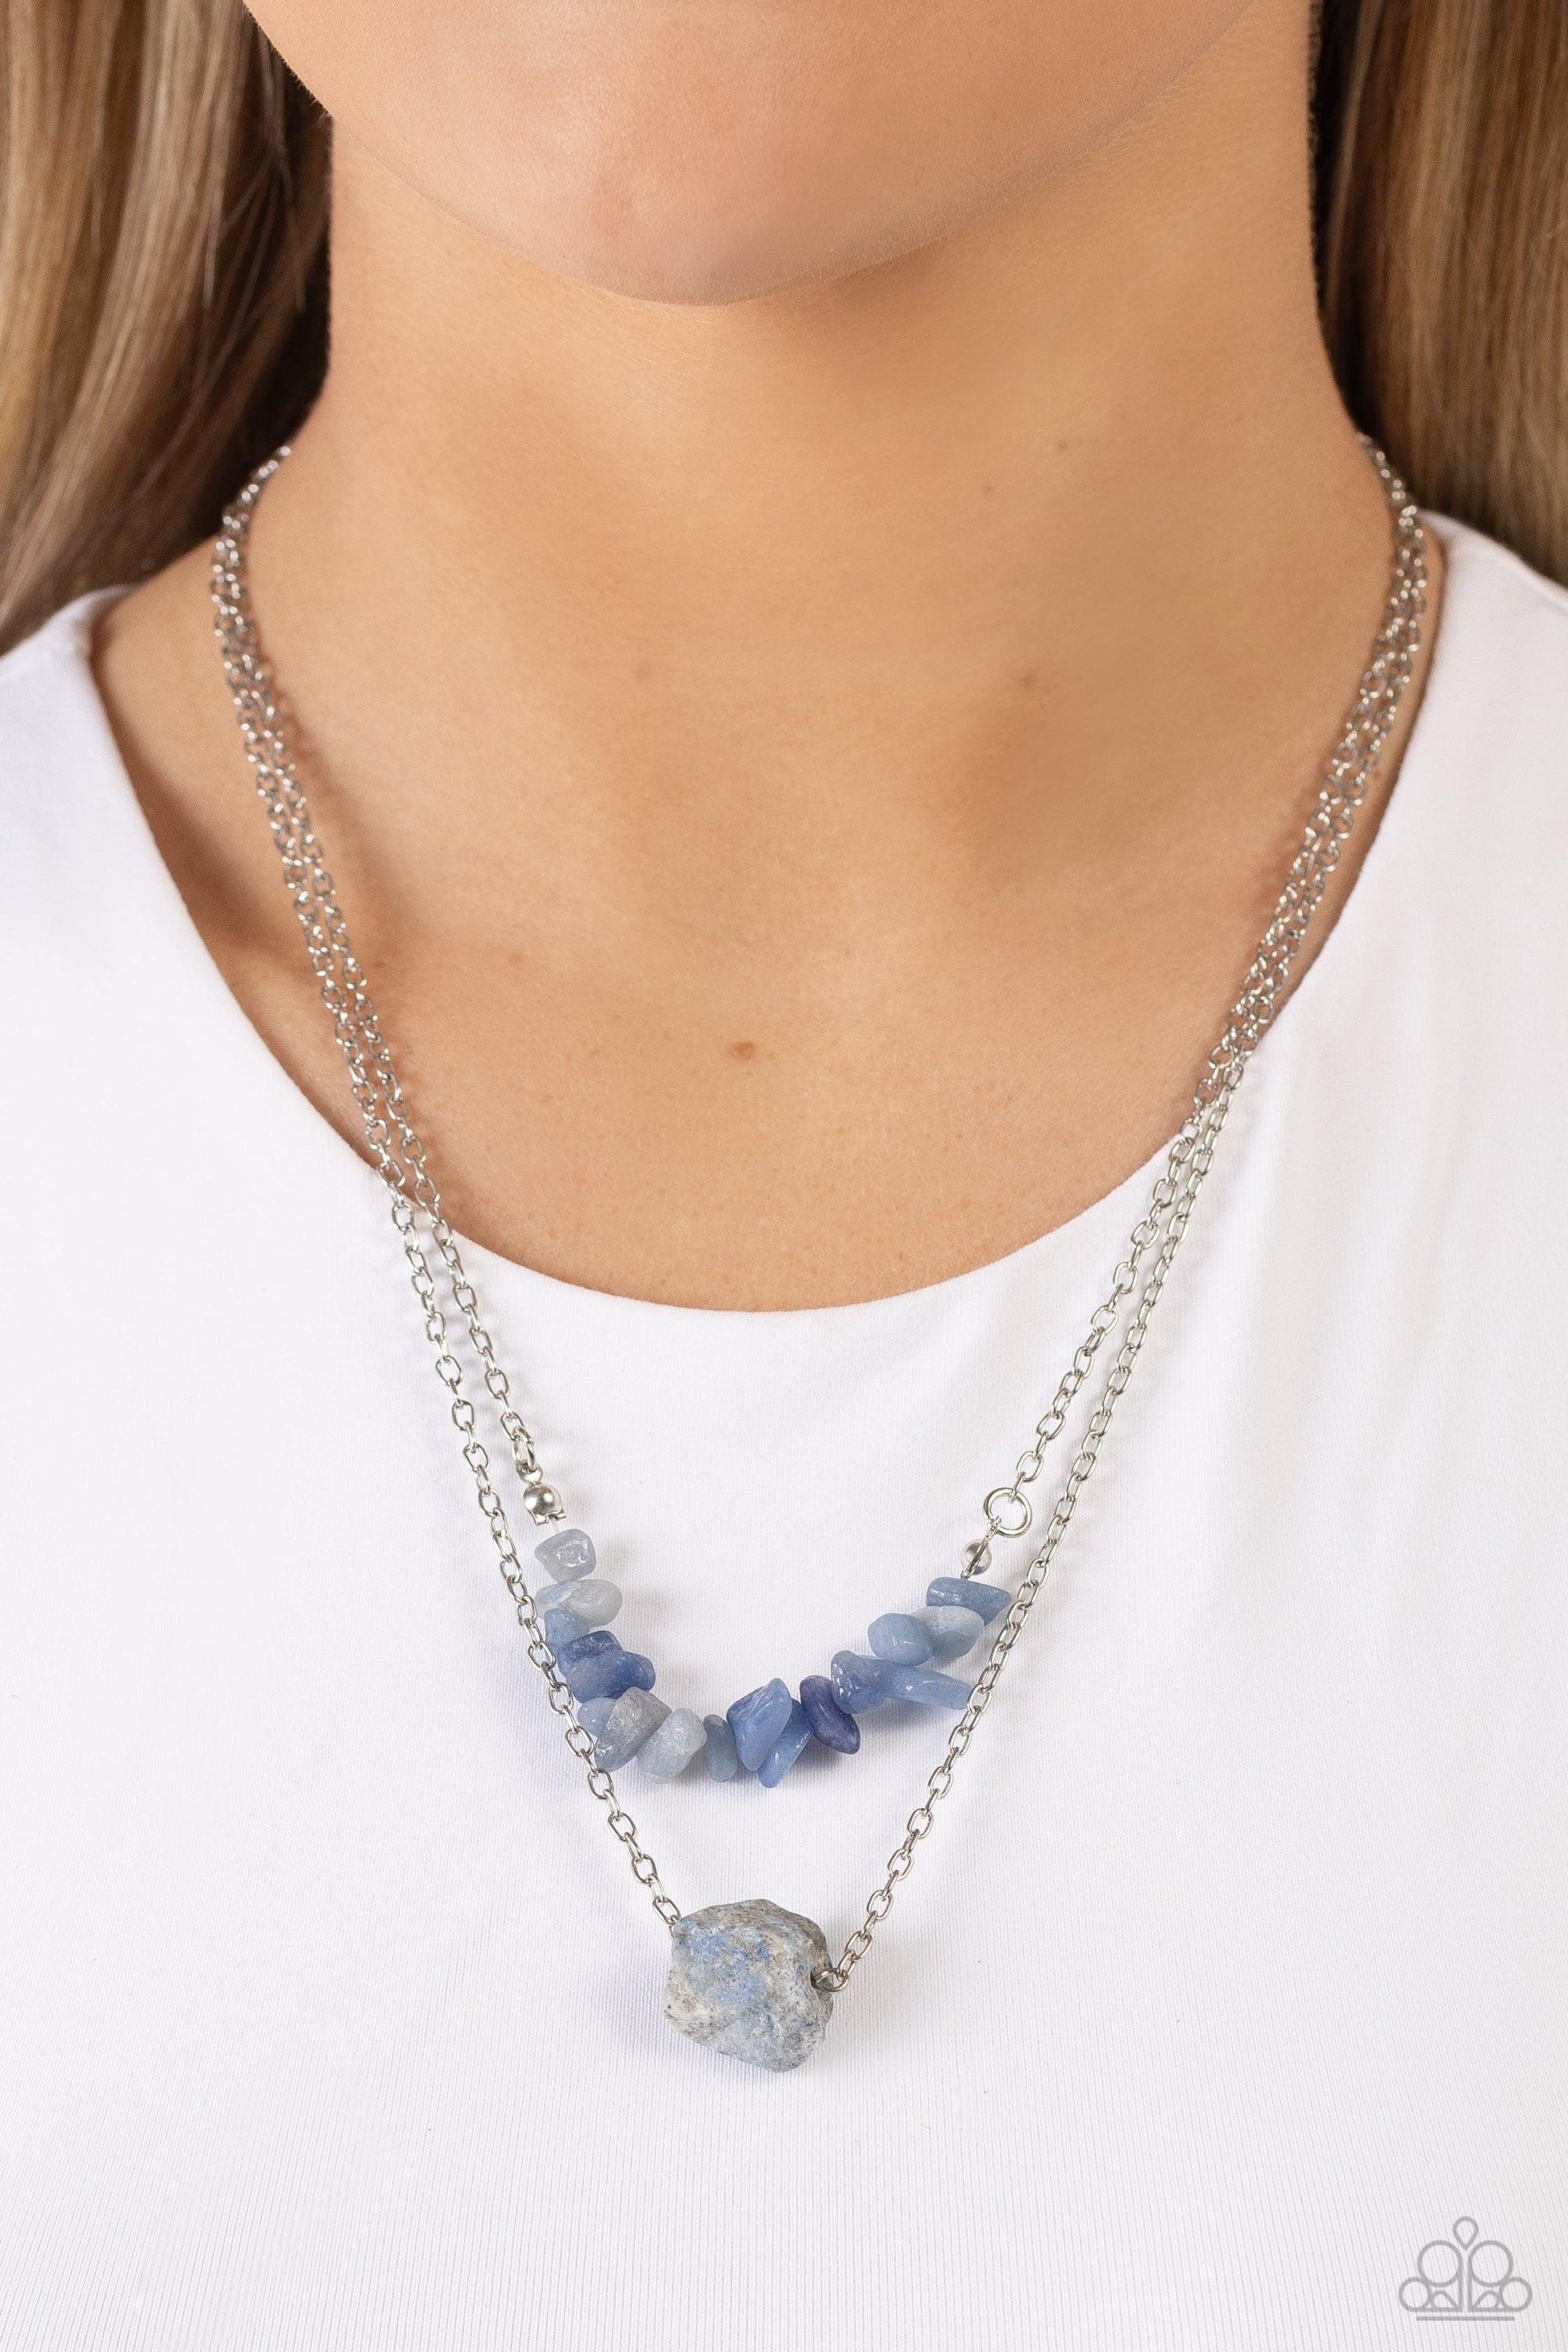 Paparazzi Accessories - Chiseled Caliber - Blue Necklace - Bling by JessieK